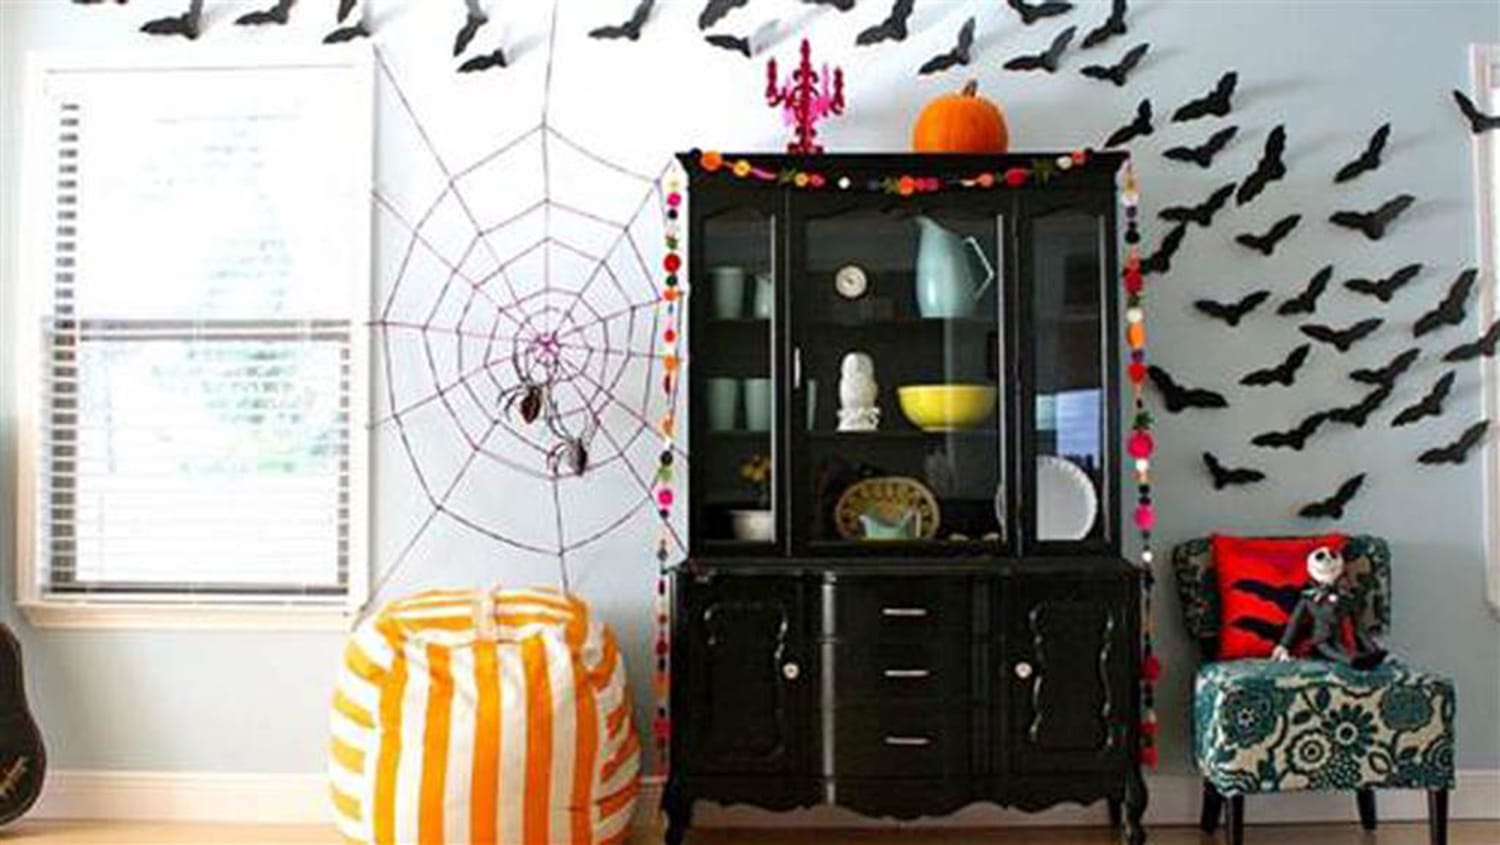 DIY Halloween decorations: Halloween crafts for the whole family